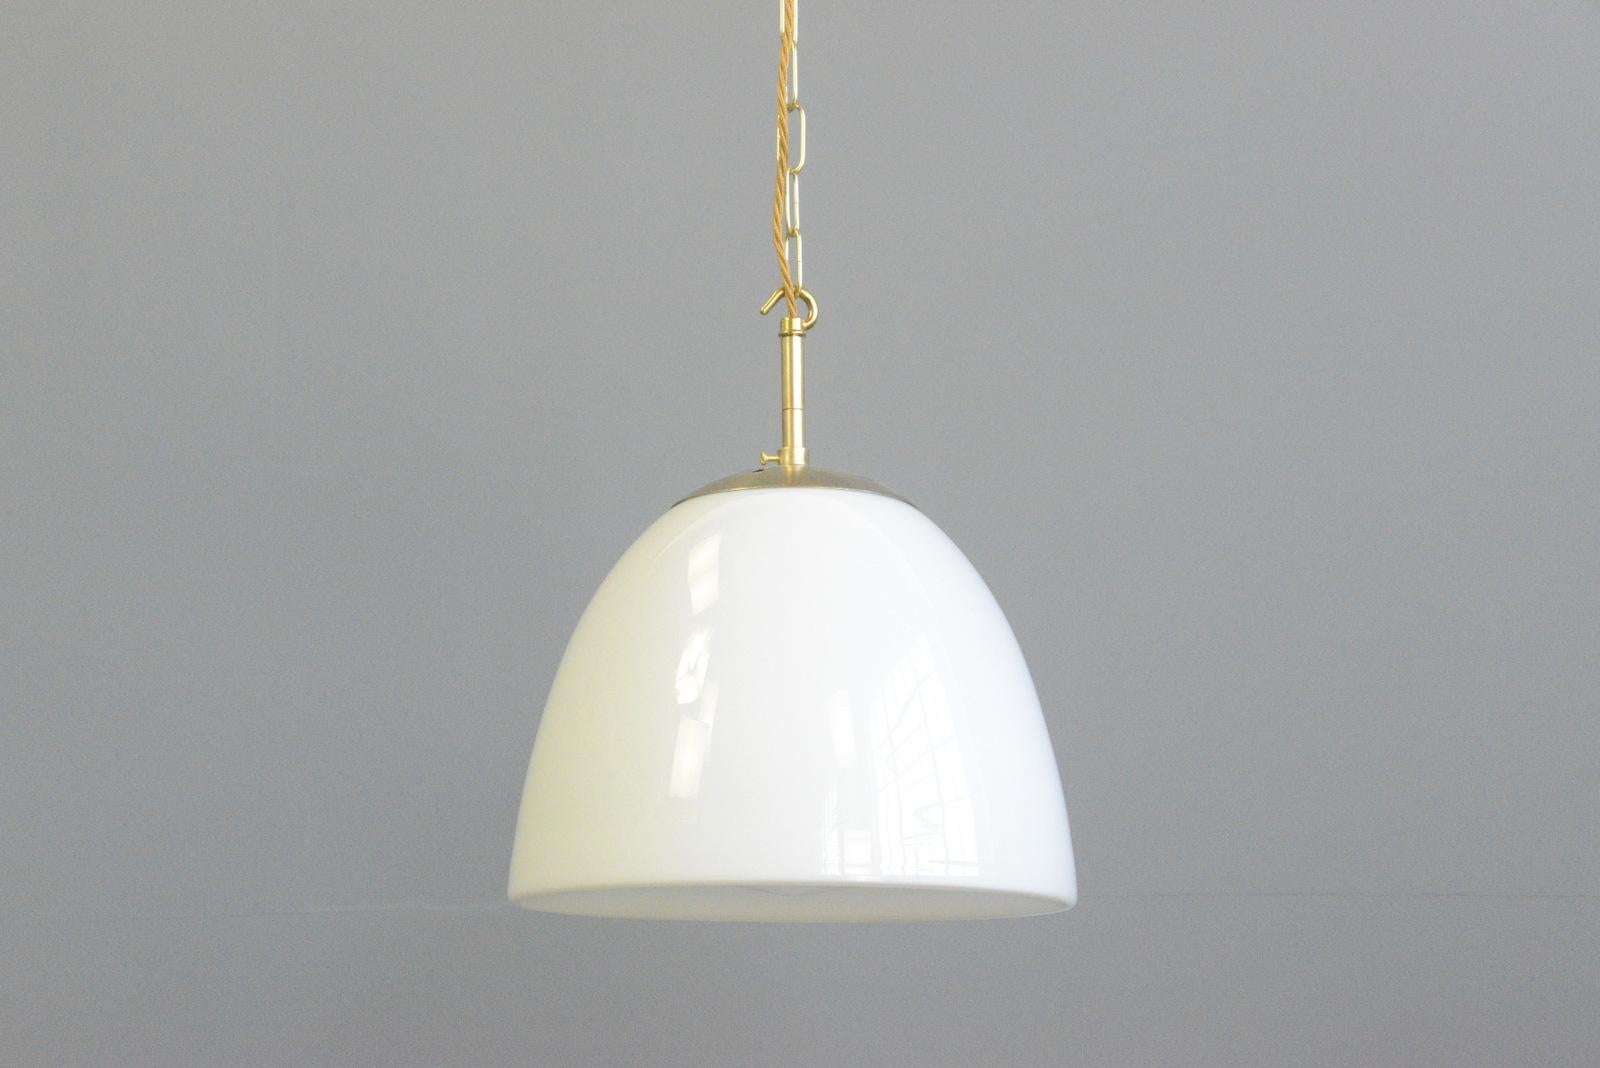 Opaline pendant lights by Vilhelm Lauritzen Circa 1950s

- Opaline glass with a slight concave and point on the underneath
- Brass monks cap top
- Takes E27 fitting bulbs
- Comes with 100cm of black cable
- Designed by Vilhelm Lauritzen
-